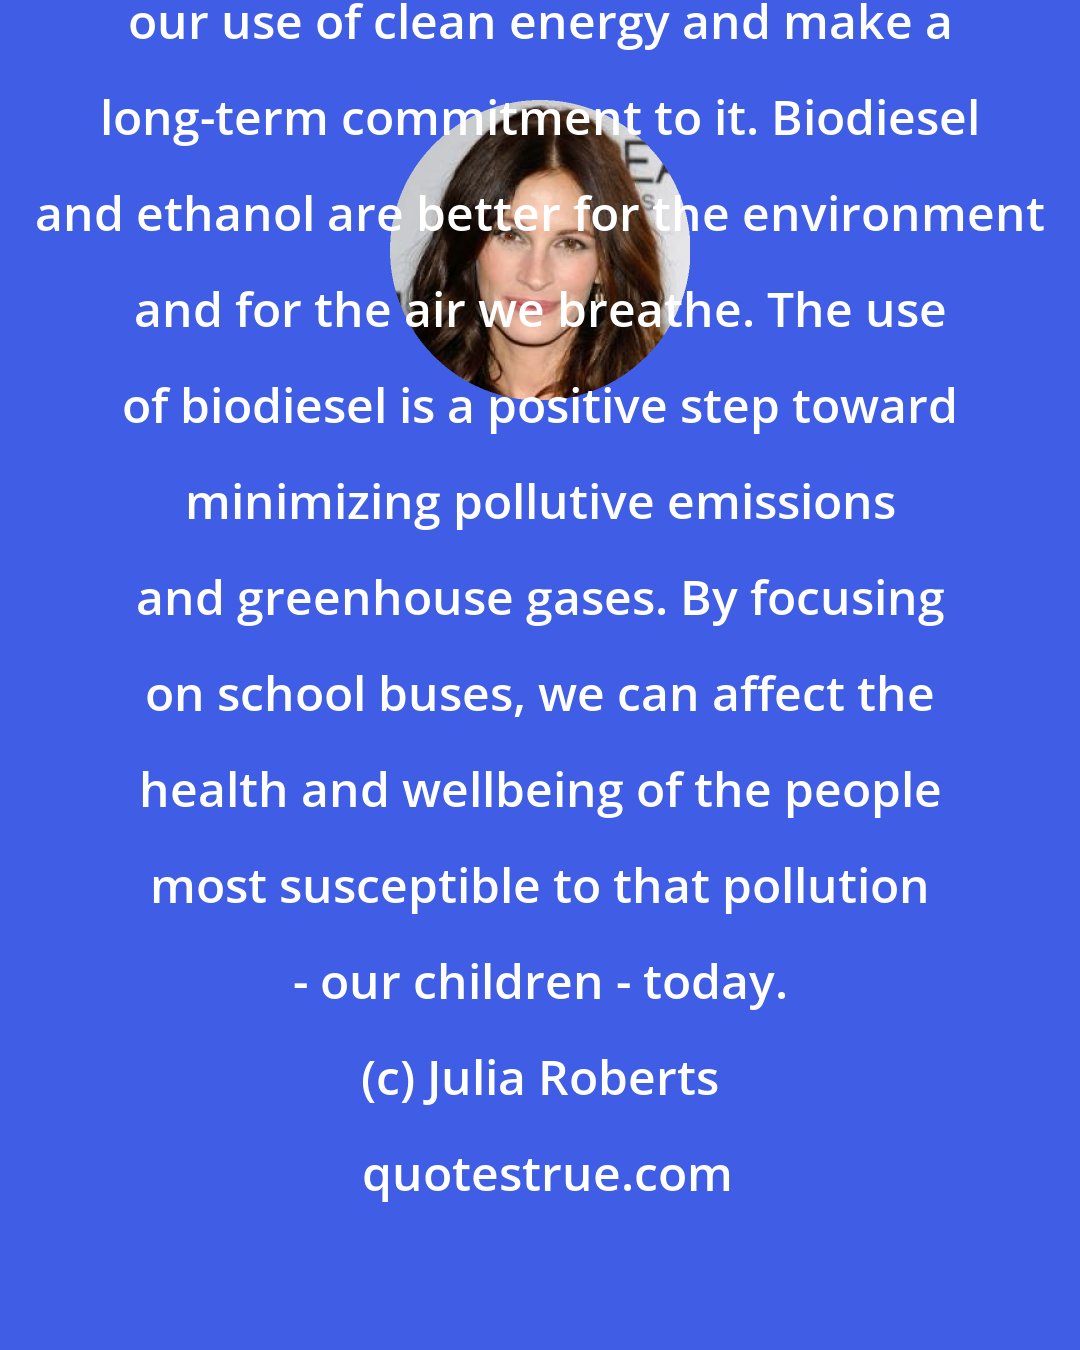 Julia Roberts: It's very important that we expand our use of clean energy and make a long-term commitment to it. Biodiesel and ethanol are better for the environment and for the air we breathe. The use of biodiesel is a positive step toward minimizing pollutive emissions and greenhouse gases. By focusing on school buses, we can affect the health and wellbeing of the people most susceptible to that pollution - our children - today.